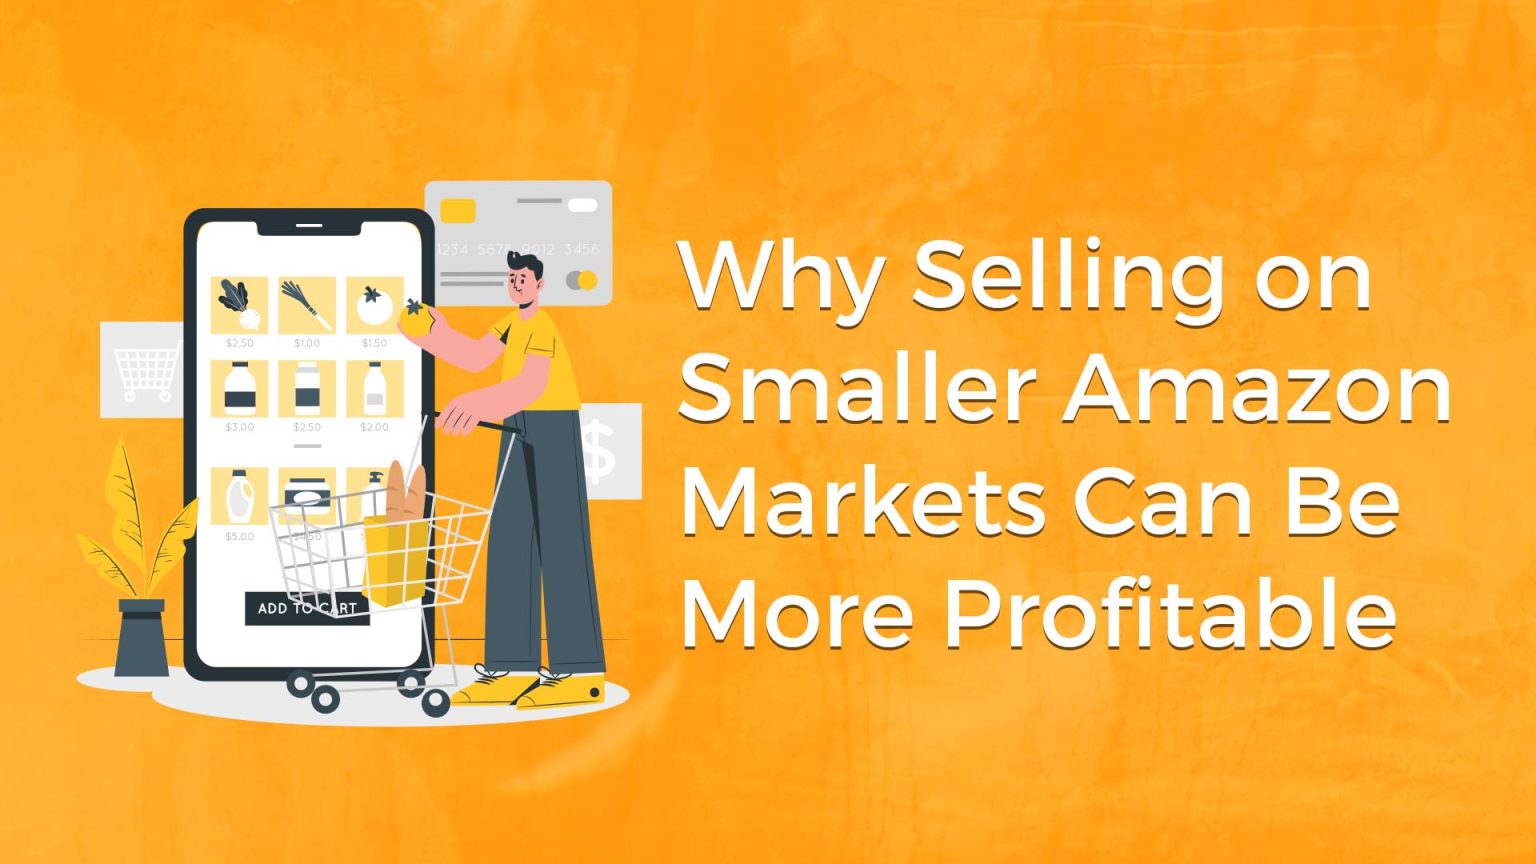 Selling on Smaller Amazon Markets Can Be More Profitable